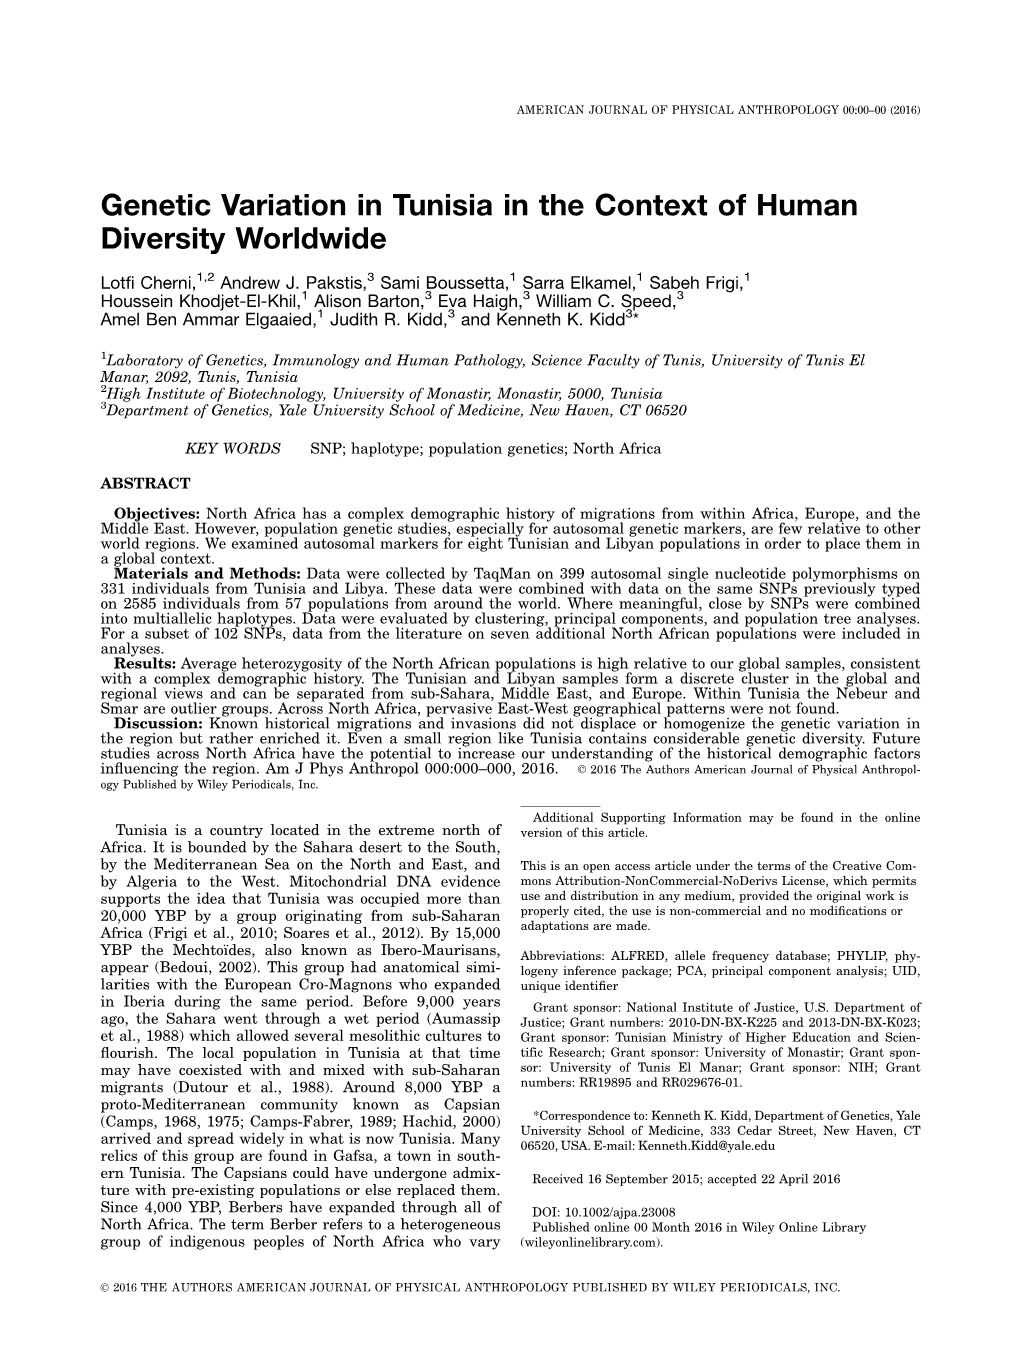 Genetic Variation in Tunisia in the Context of Human Diversity Worldwide